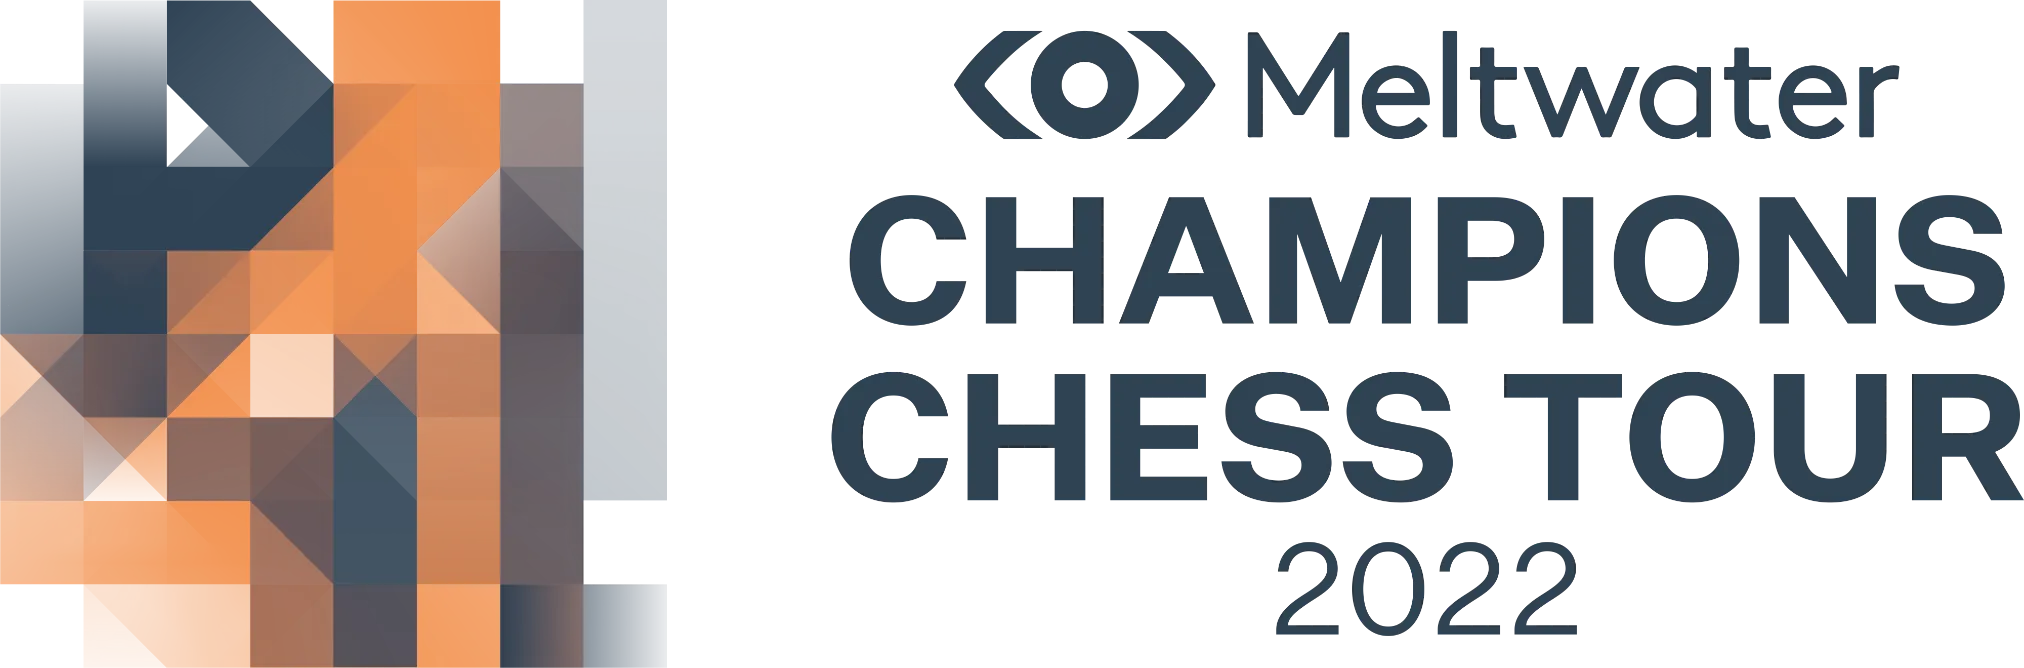 Chessable and chess24 enter historic partnership with FIDE - Play Magnus  Group